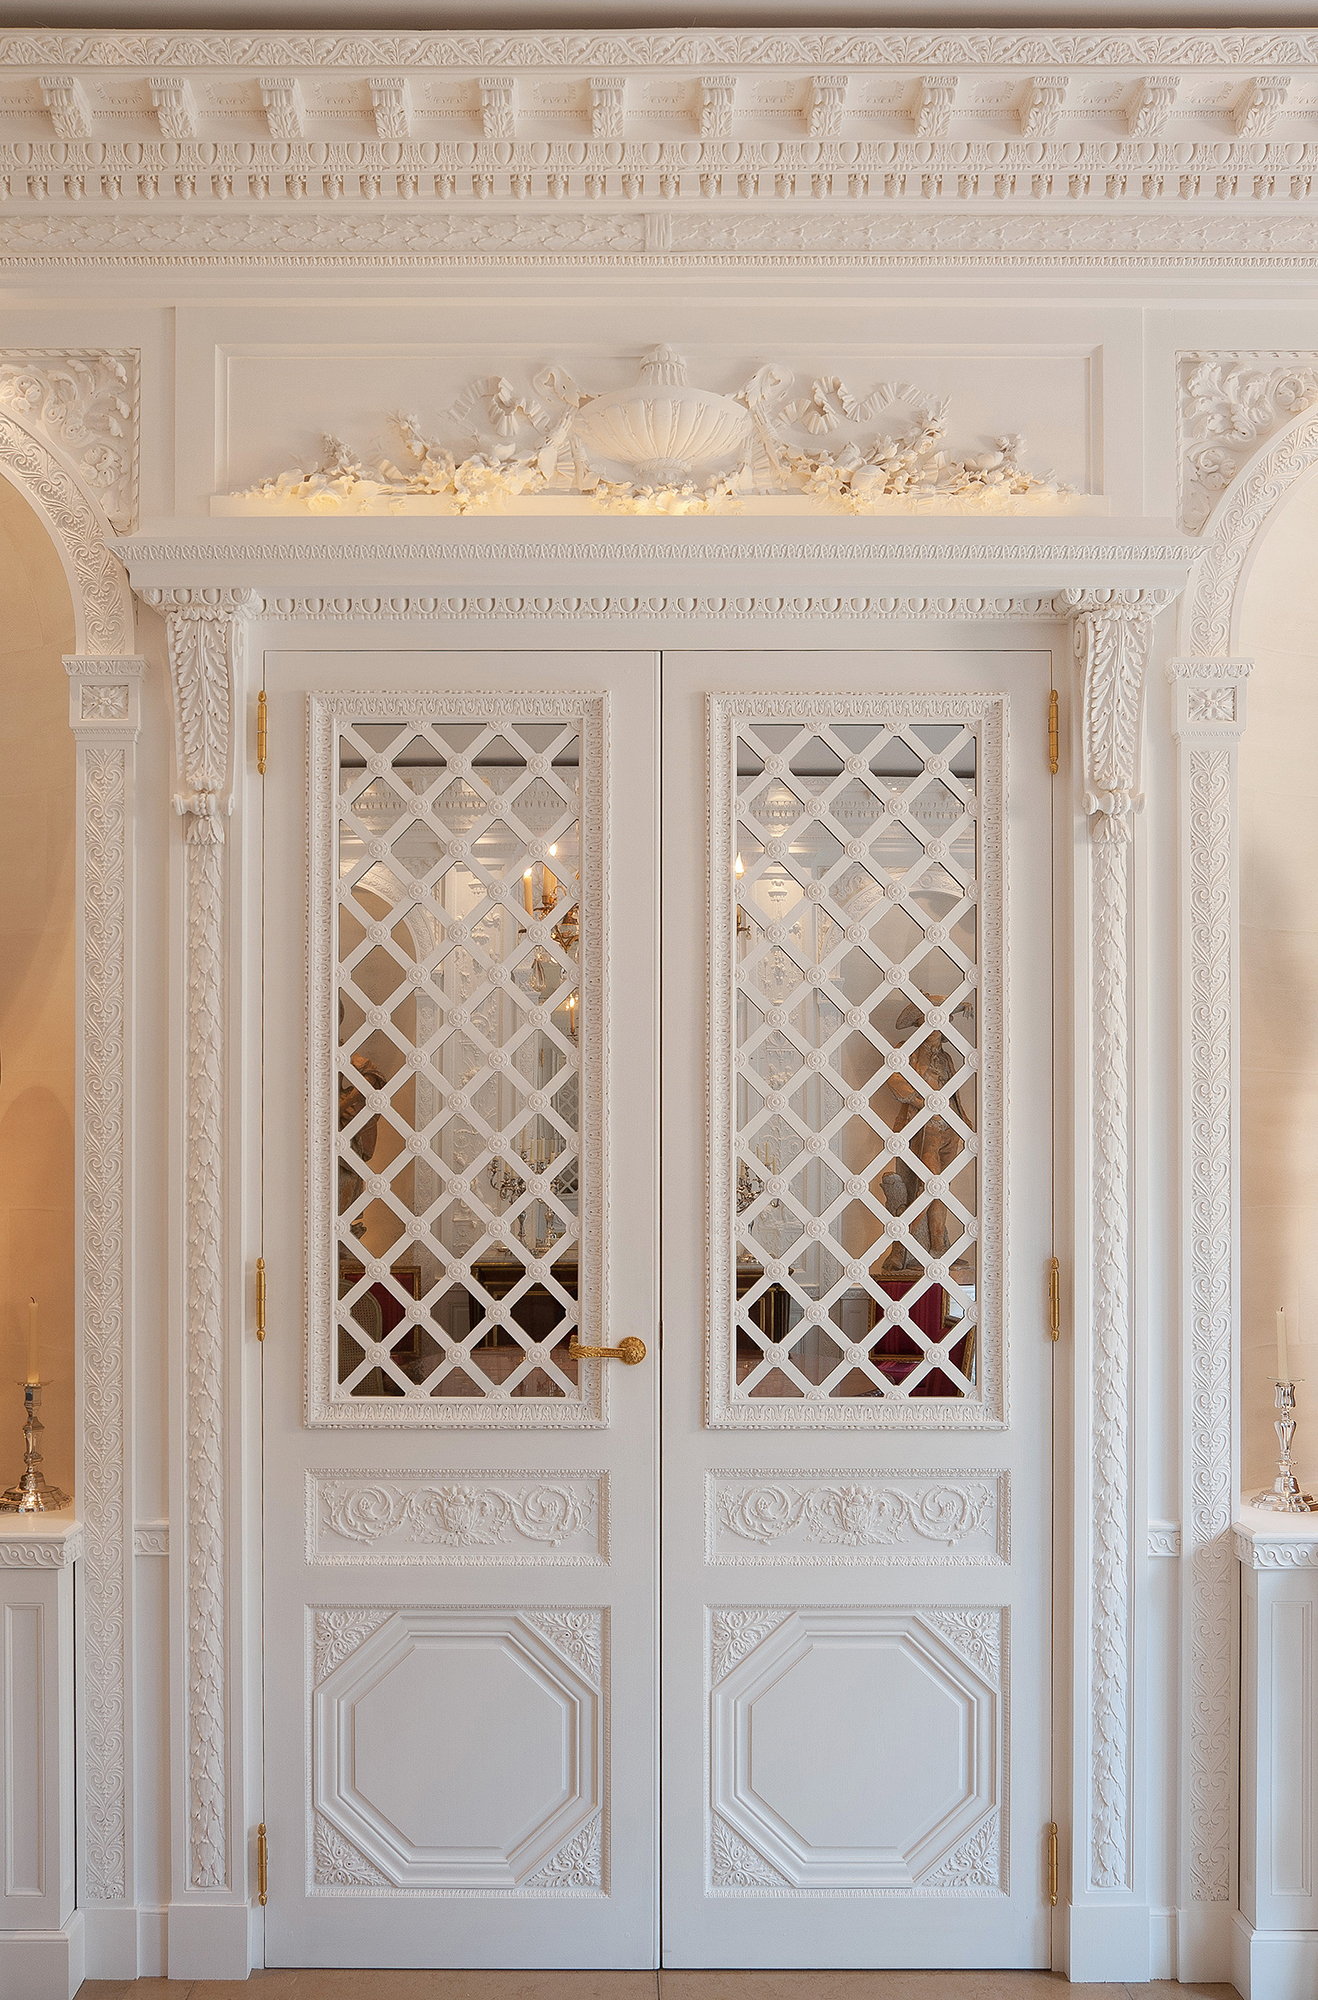 Dining-room doors inspired by Bagatelle